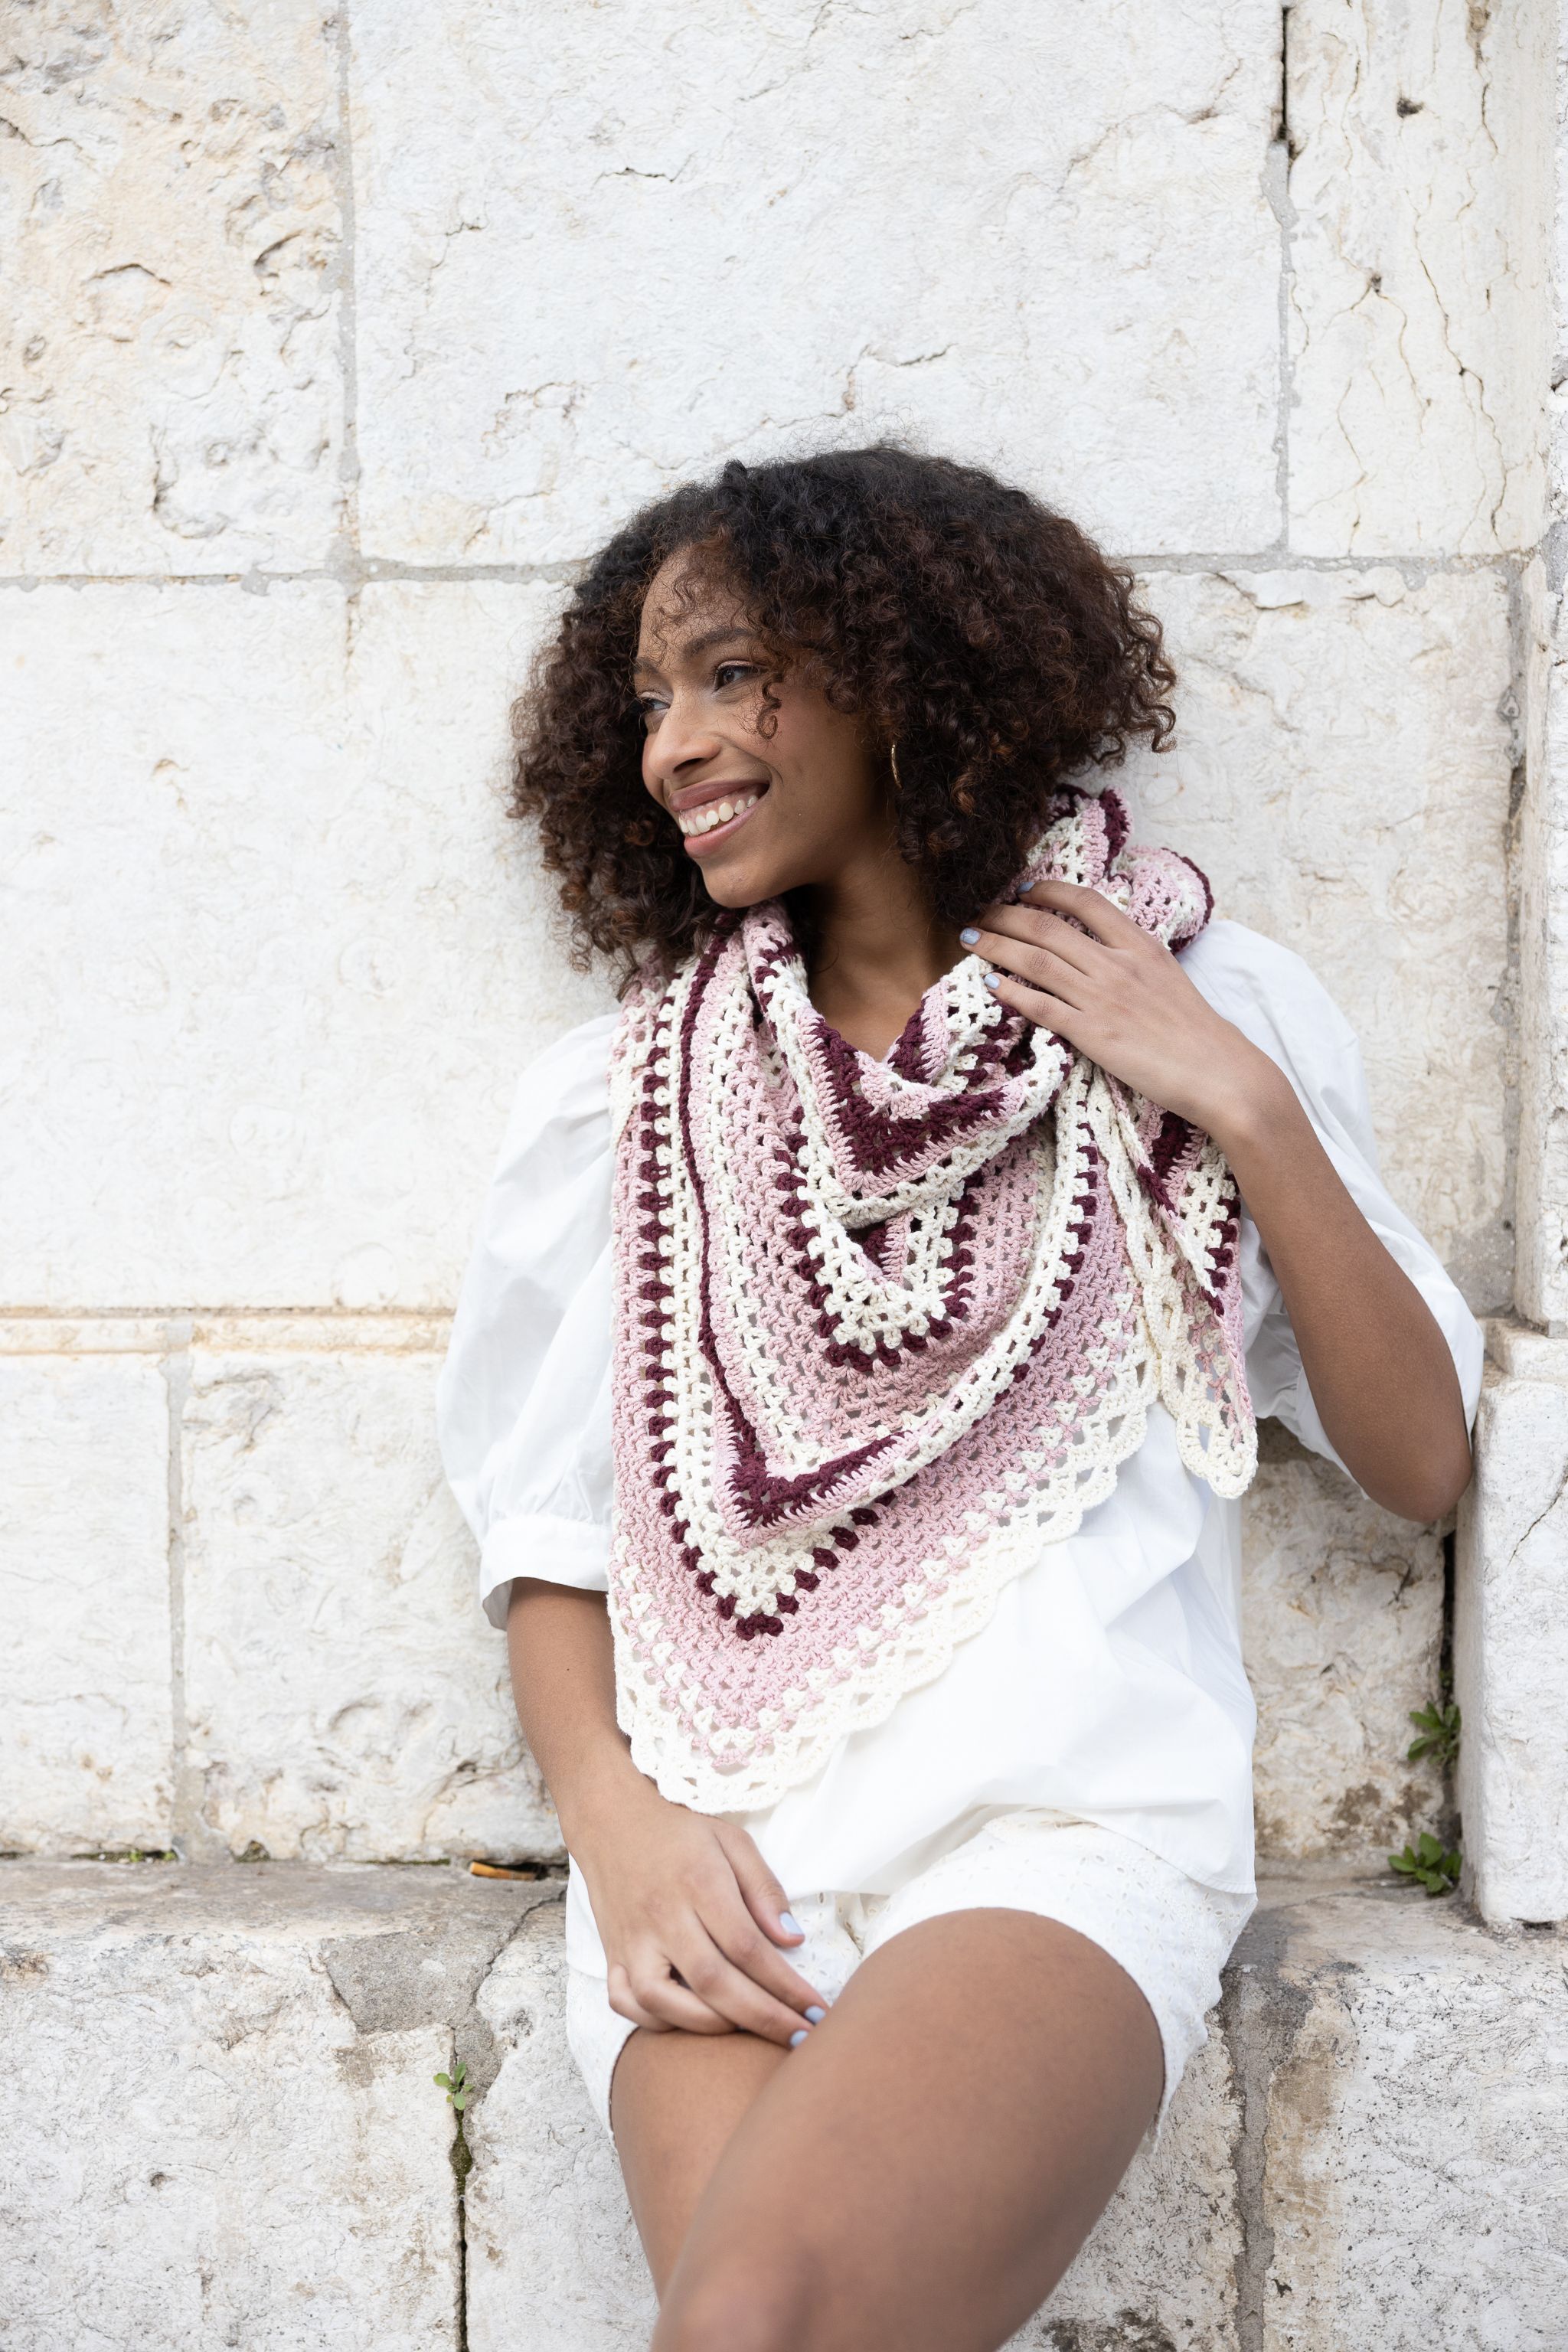 Maria - Crocheted Scarf Example 4